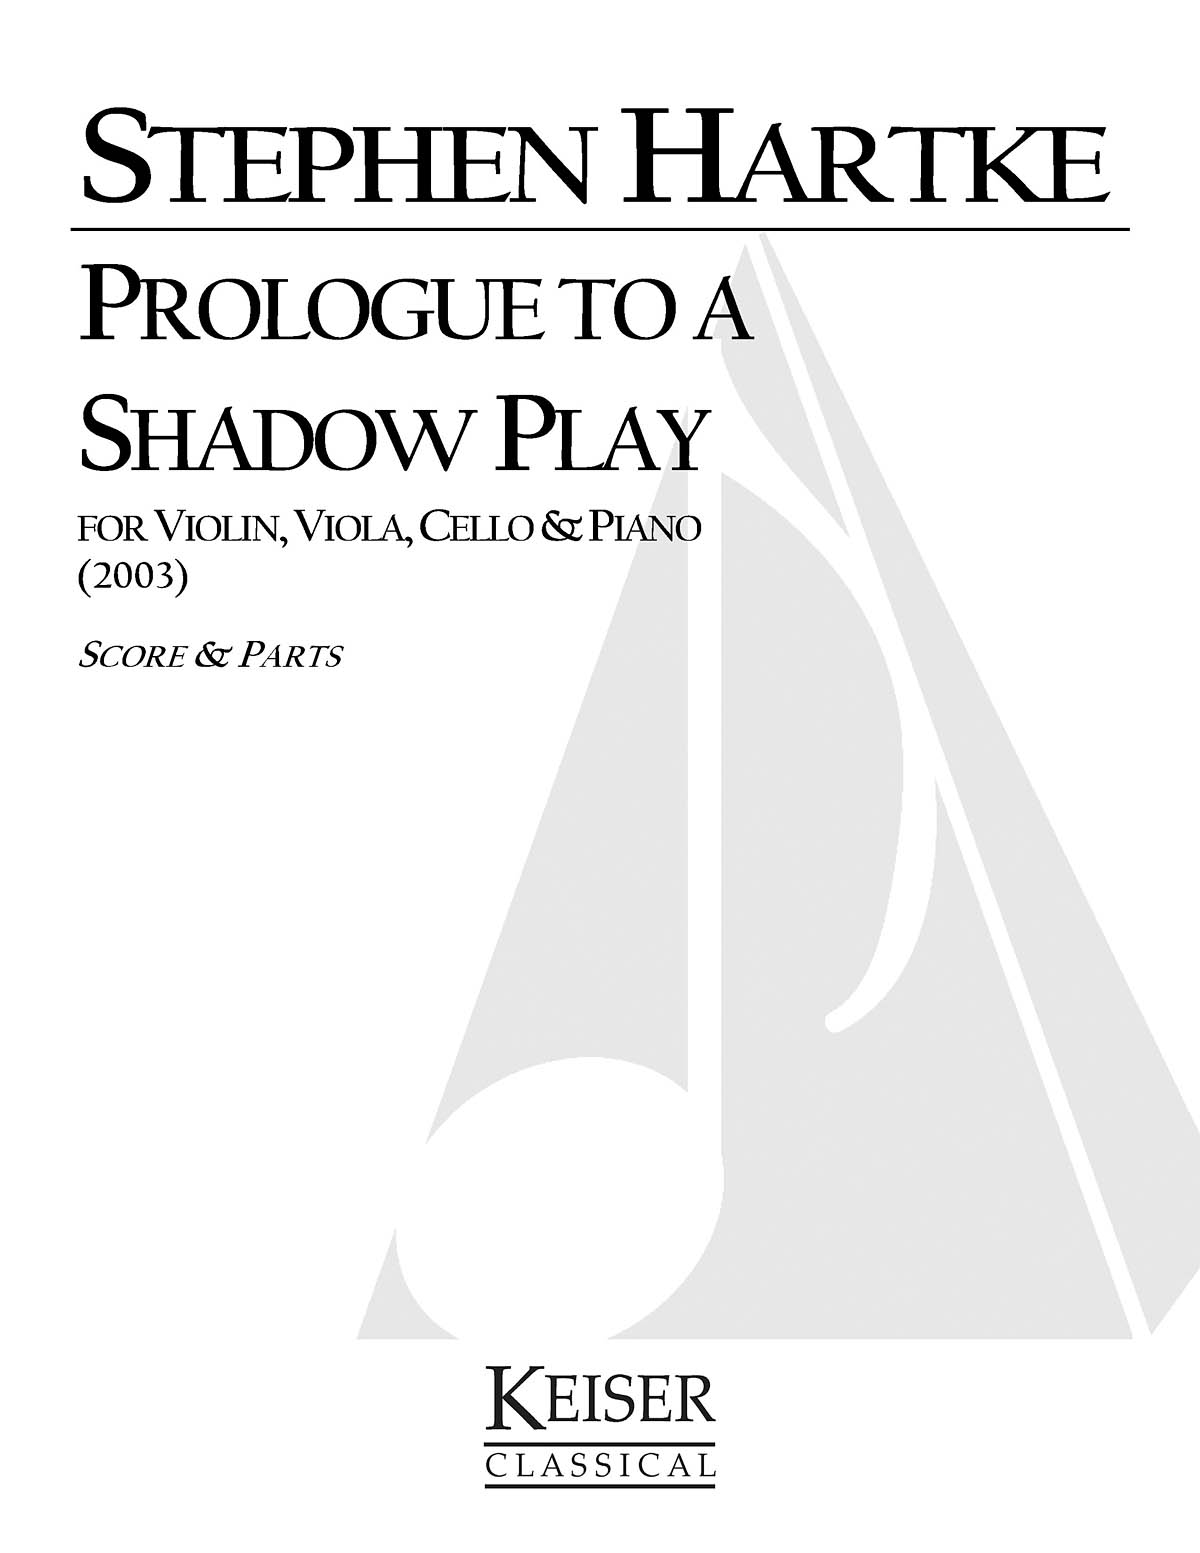 Prologue to a Shadow Play